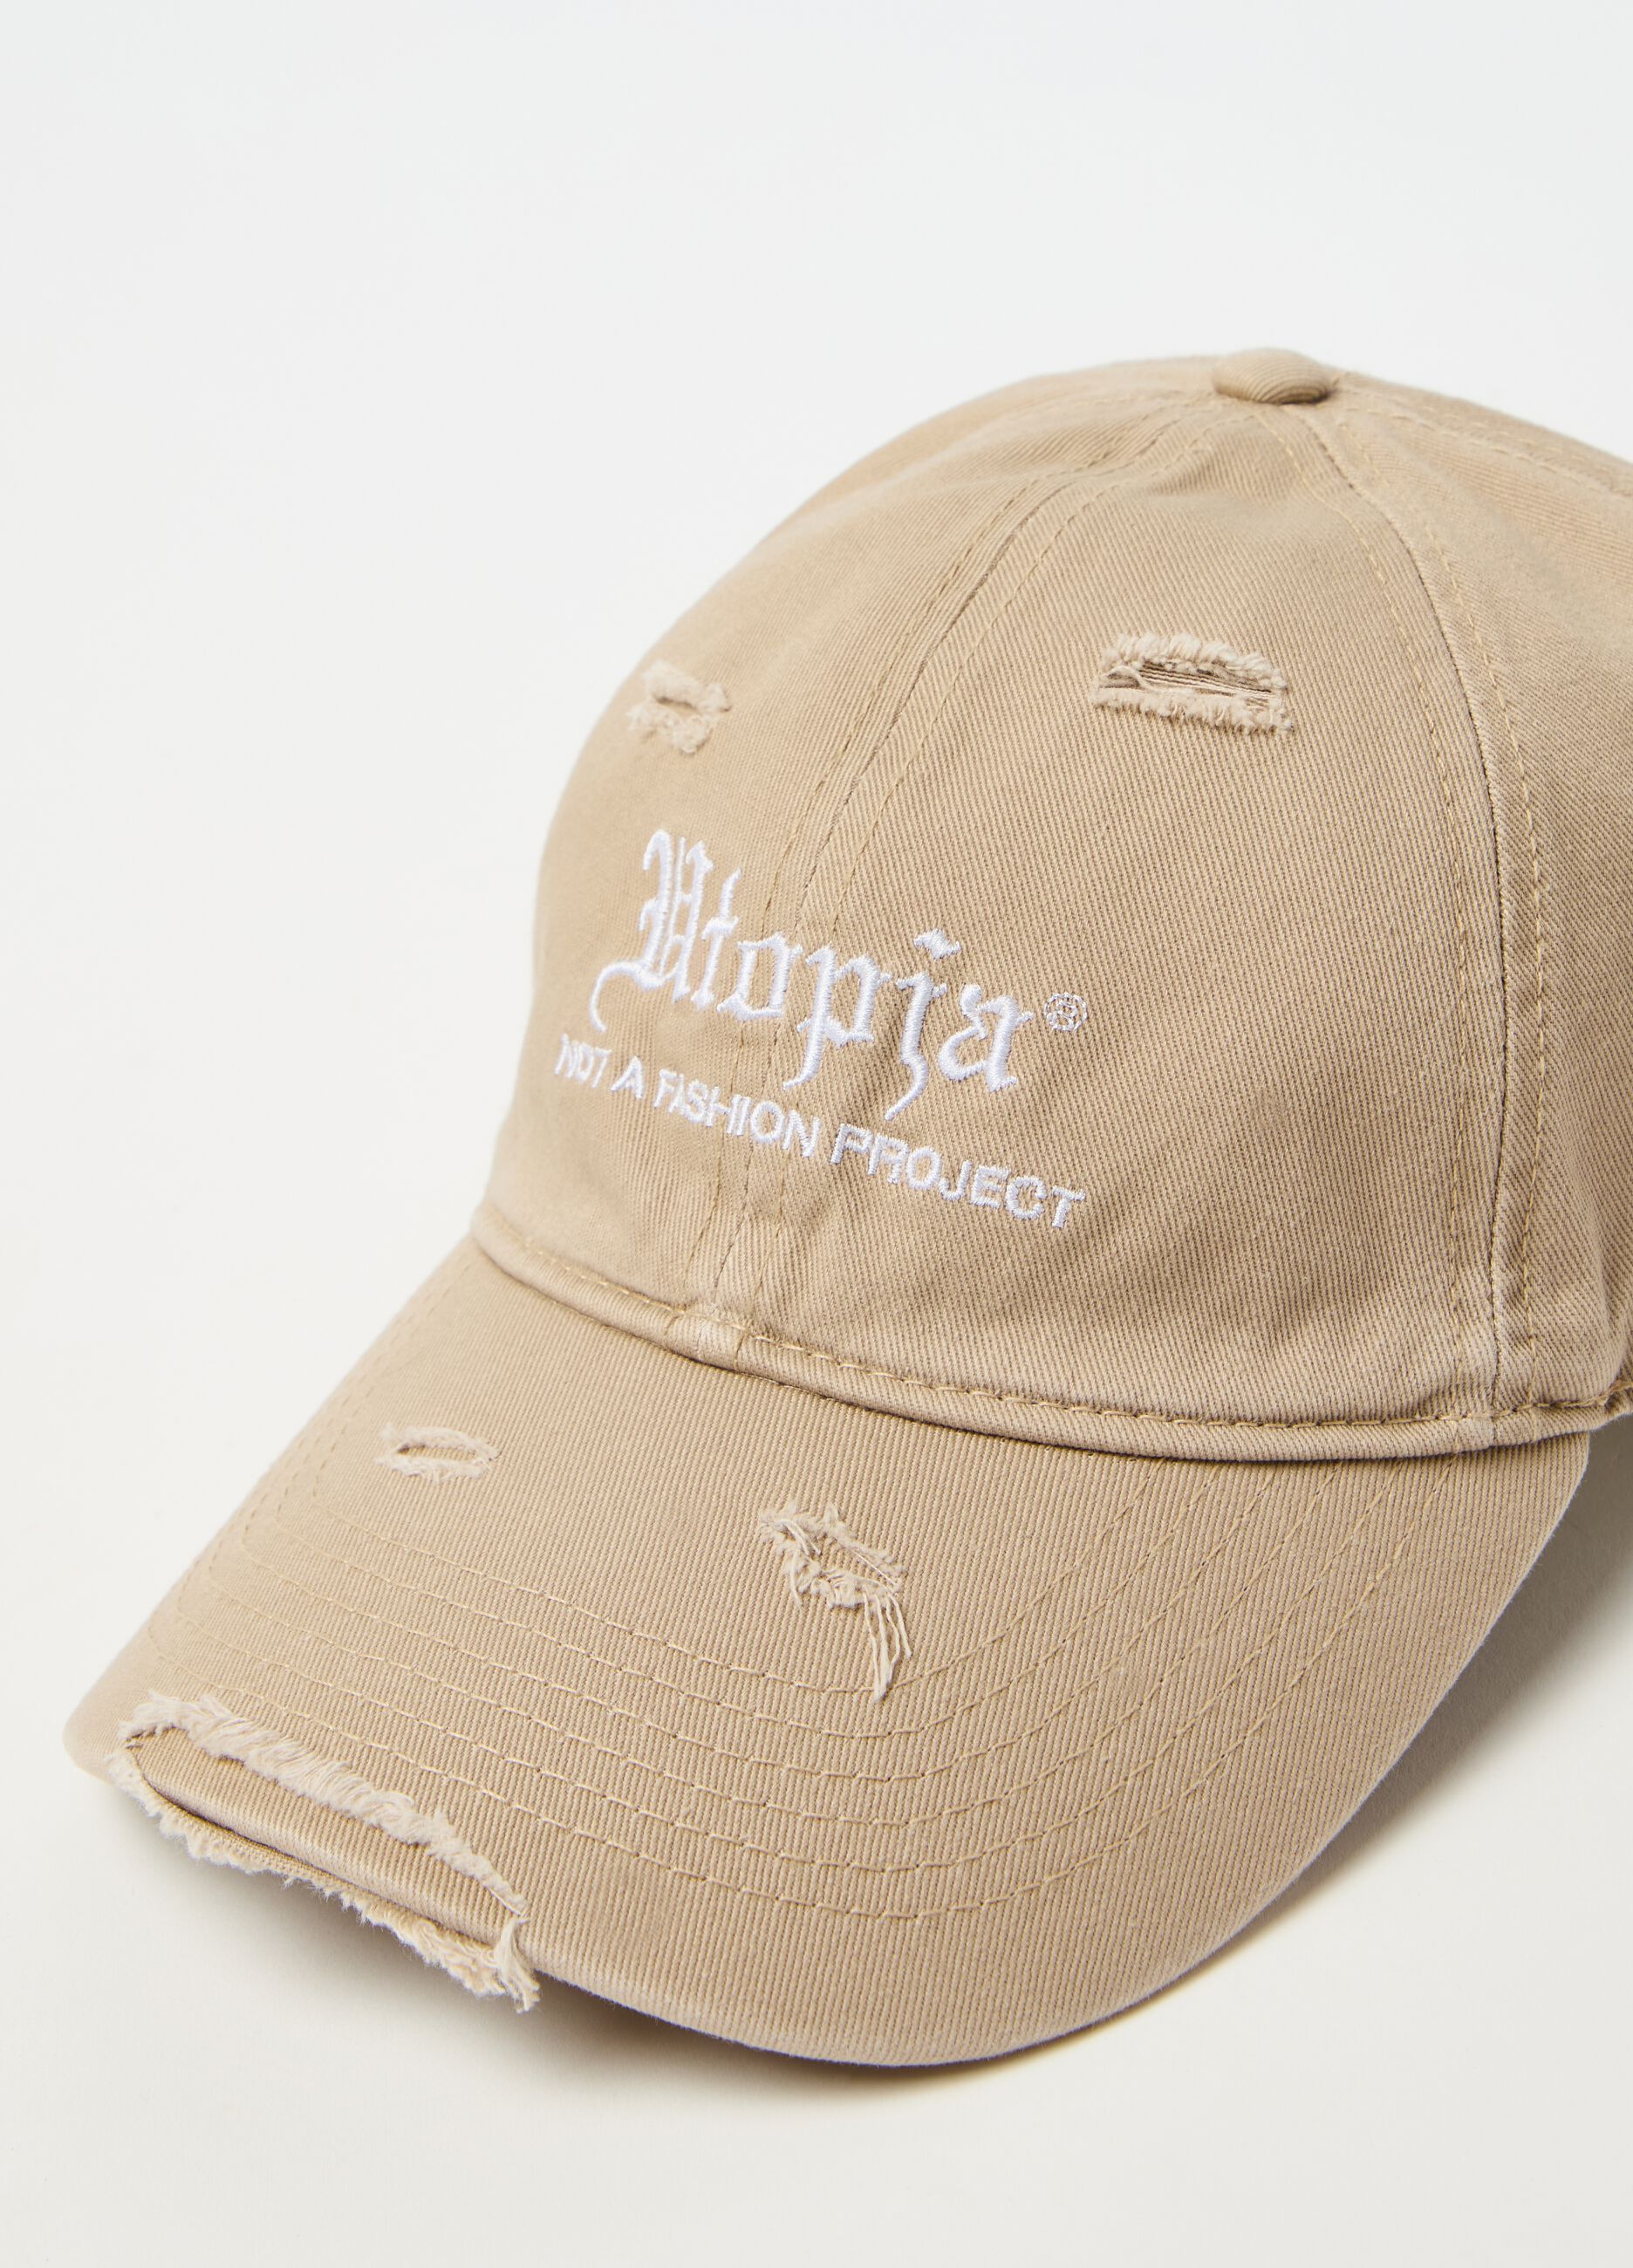 Baseball cap with abrasions